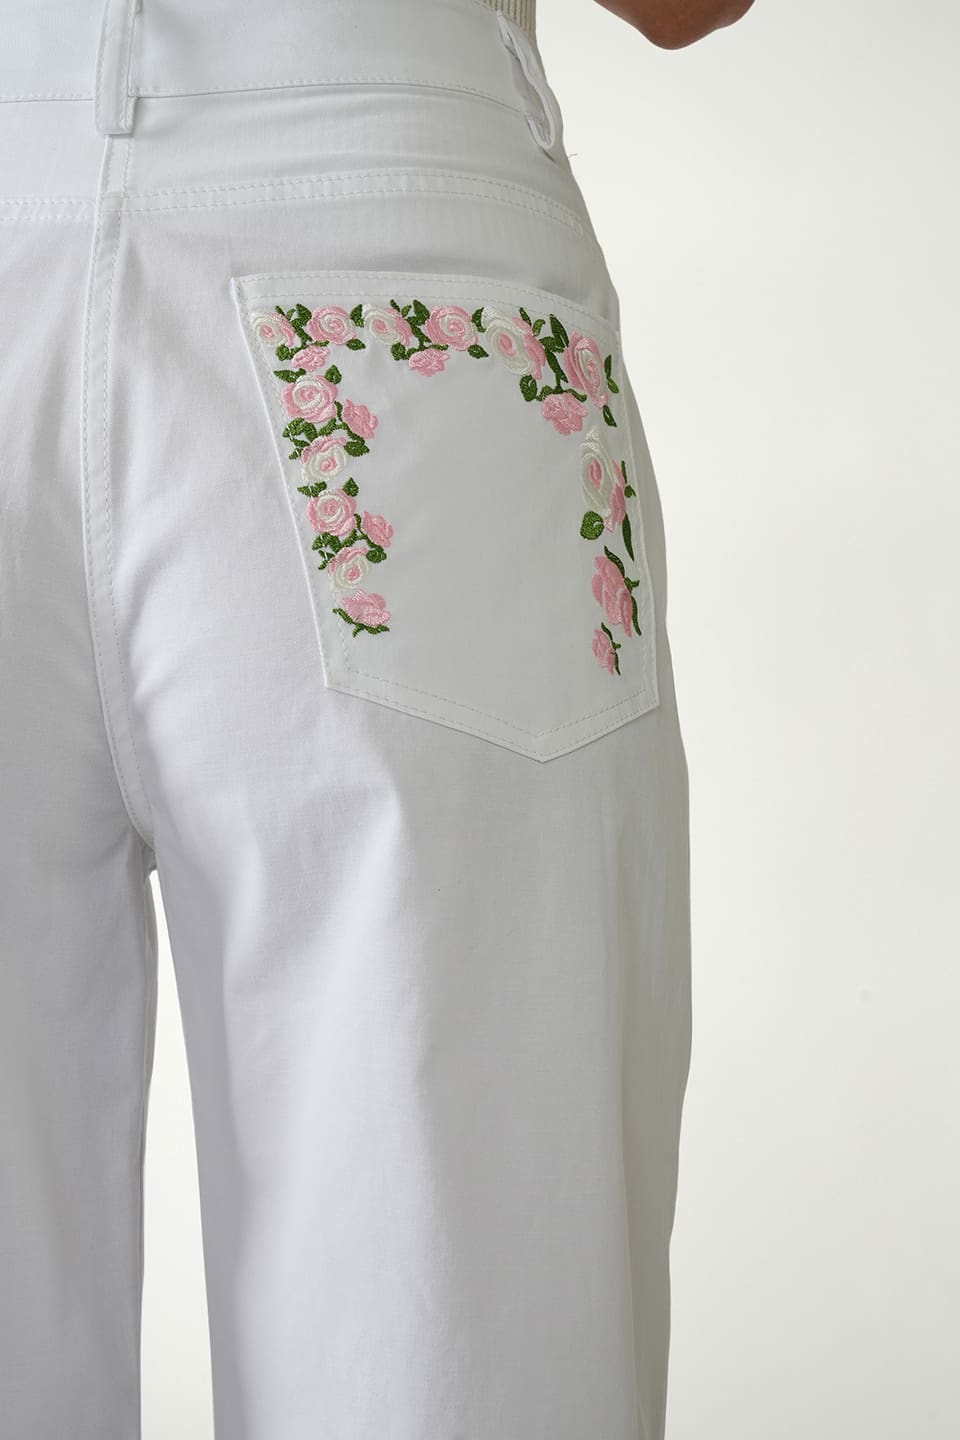 Designer White Women pants, shop online with free delivery in UAE. Product gallery 5